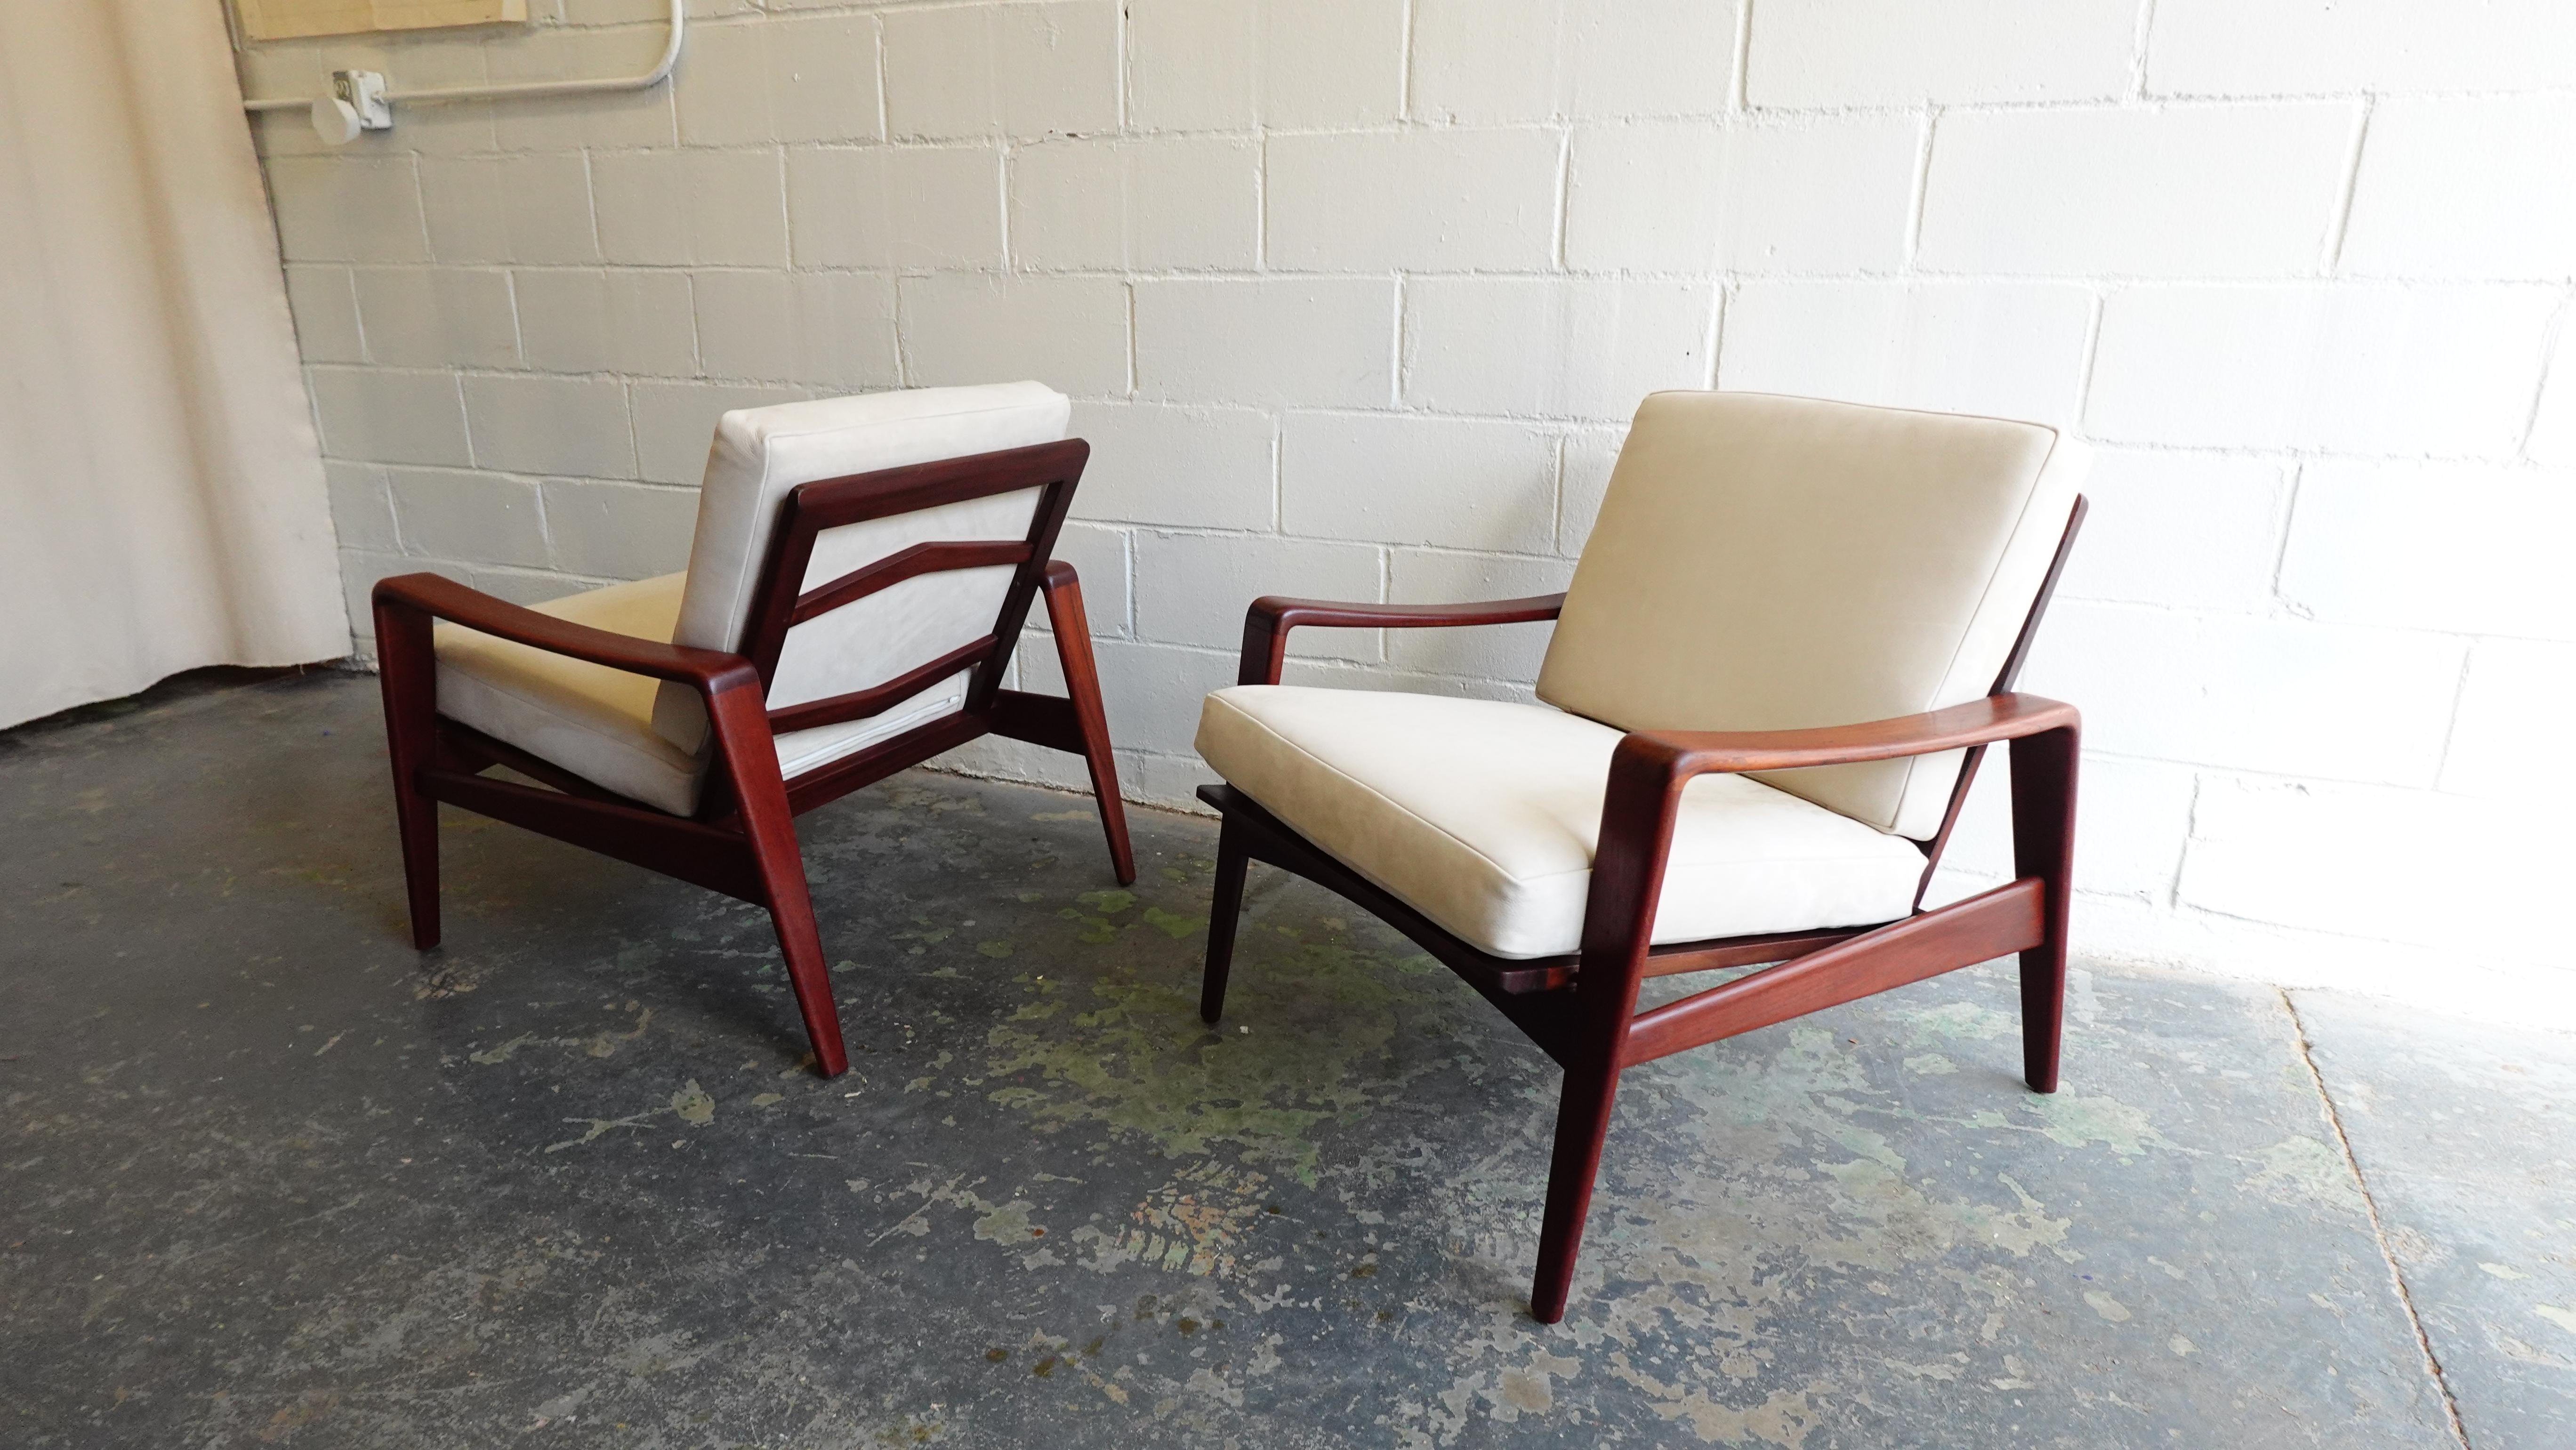 Mid-20th Century Pair of Arne Wahl Iverson Lounge Chairs for Komfort in Teak & Leather, 1960 For Sale